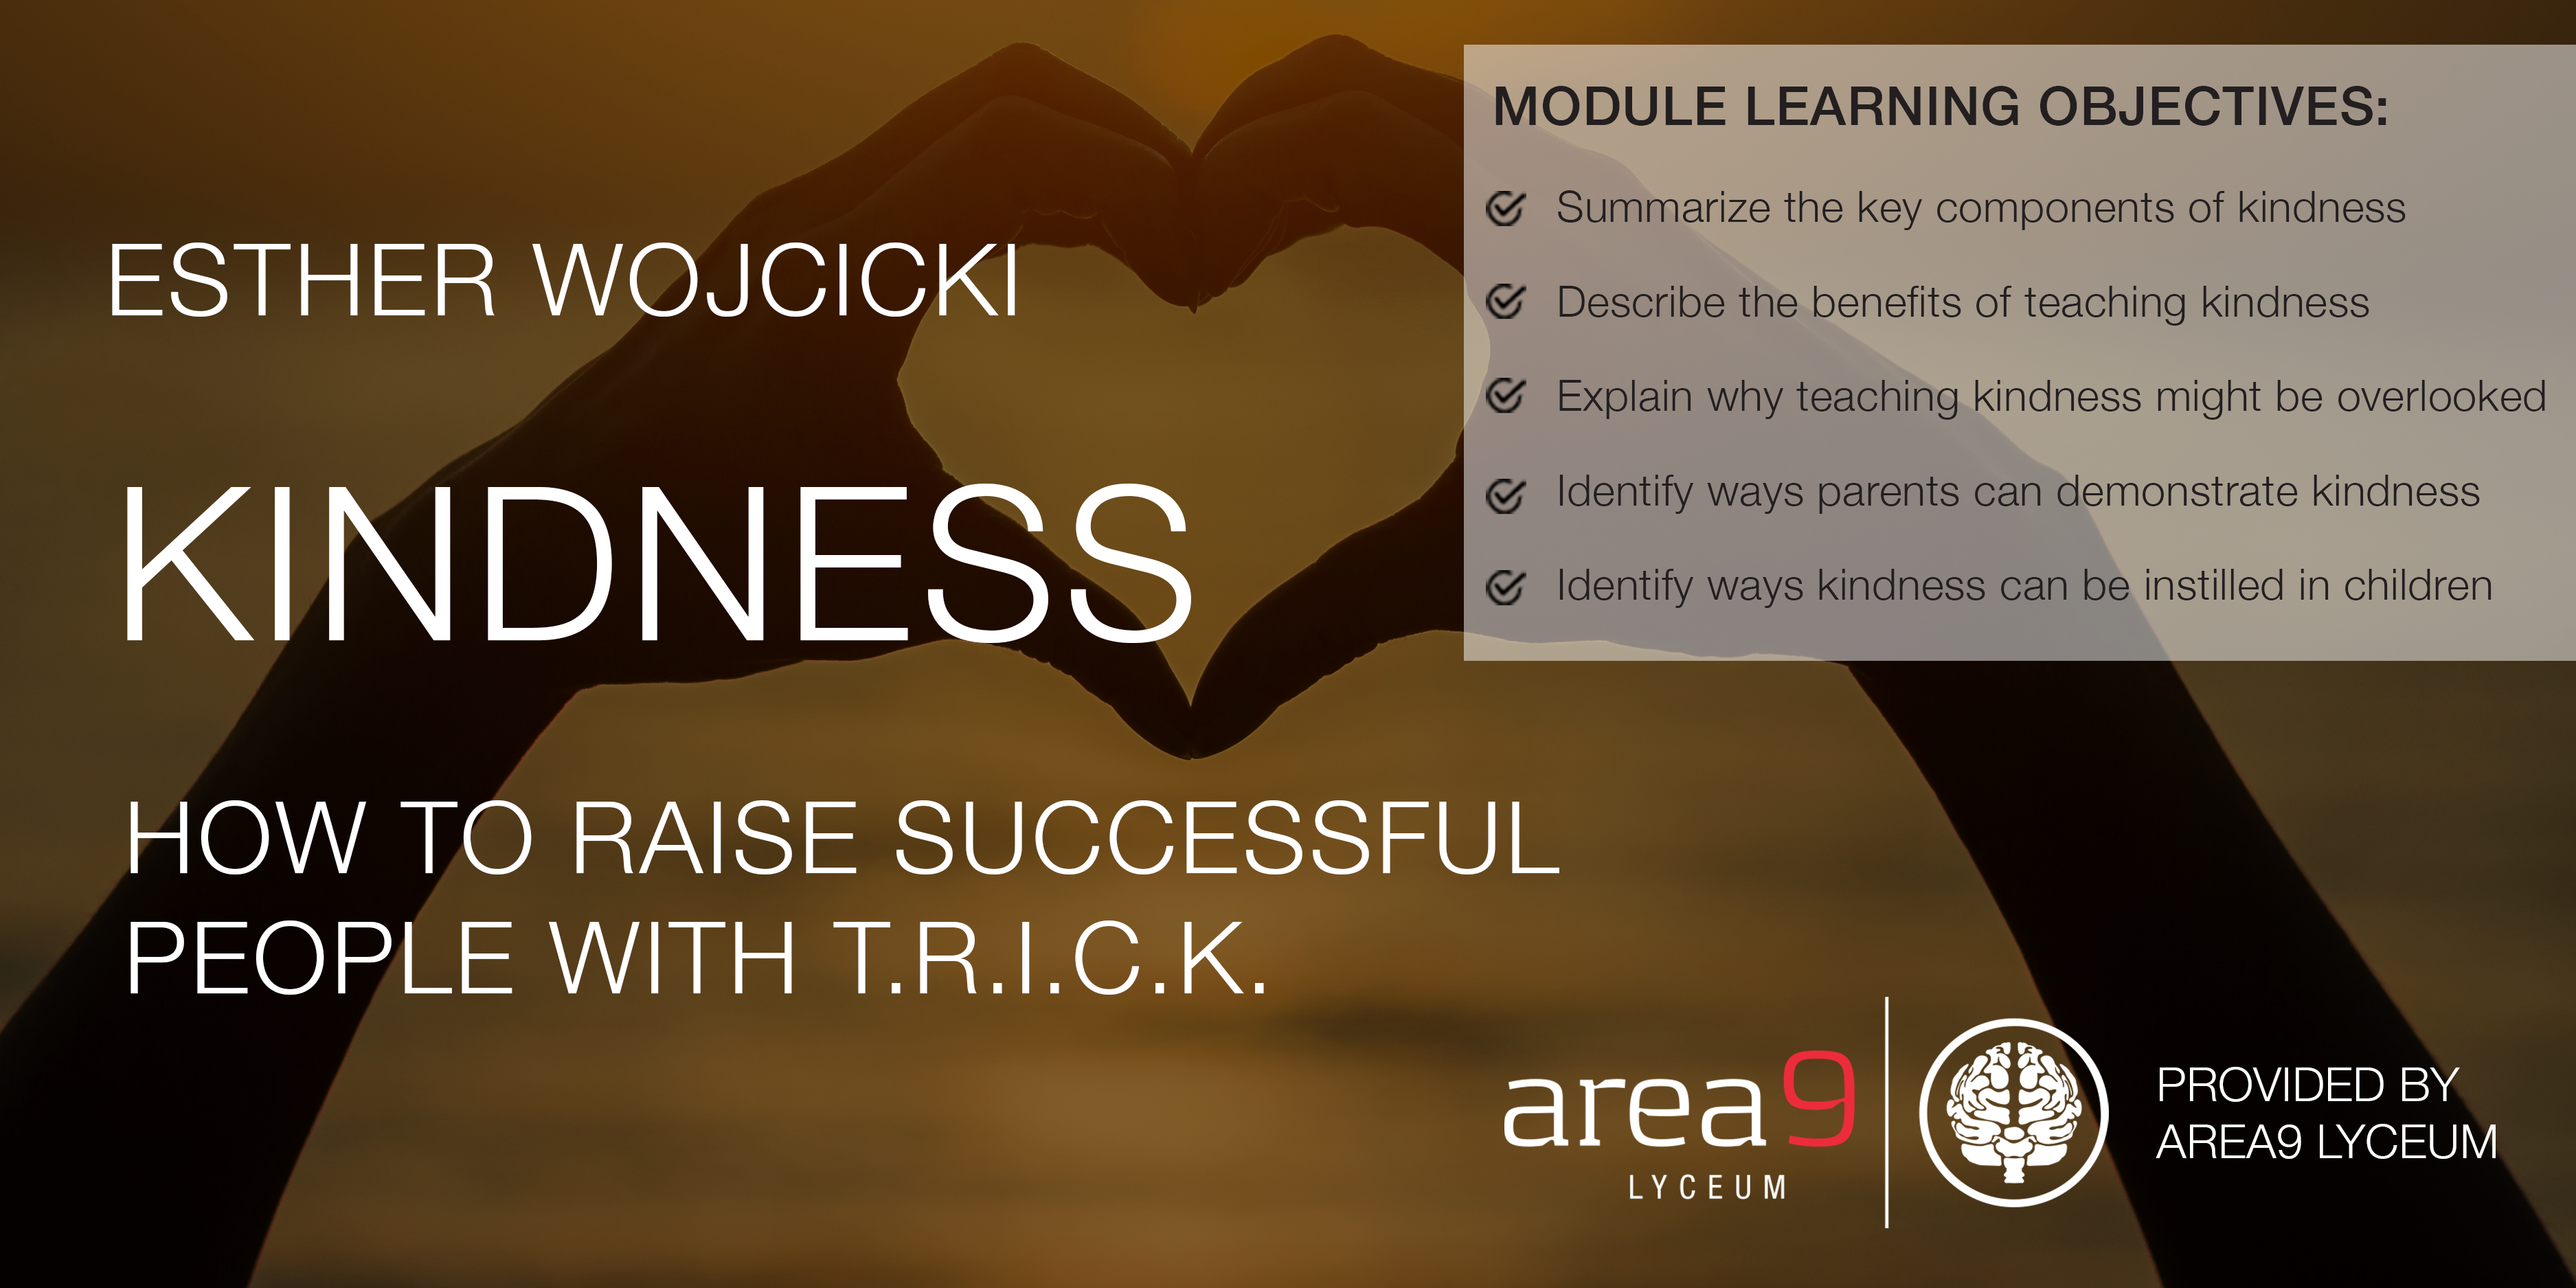 Esther Wojcicki How to Raise Successful People with TRICK Adaptive Learning Course Area9 Lyceum banner copy